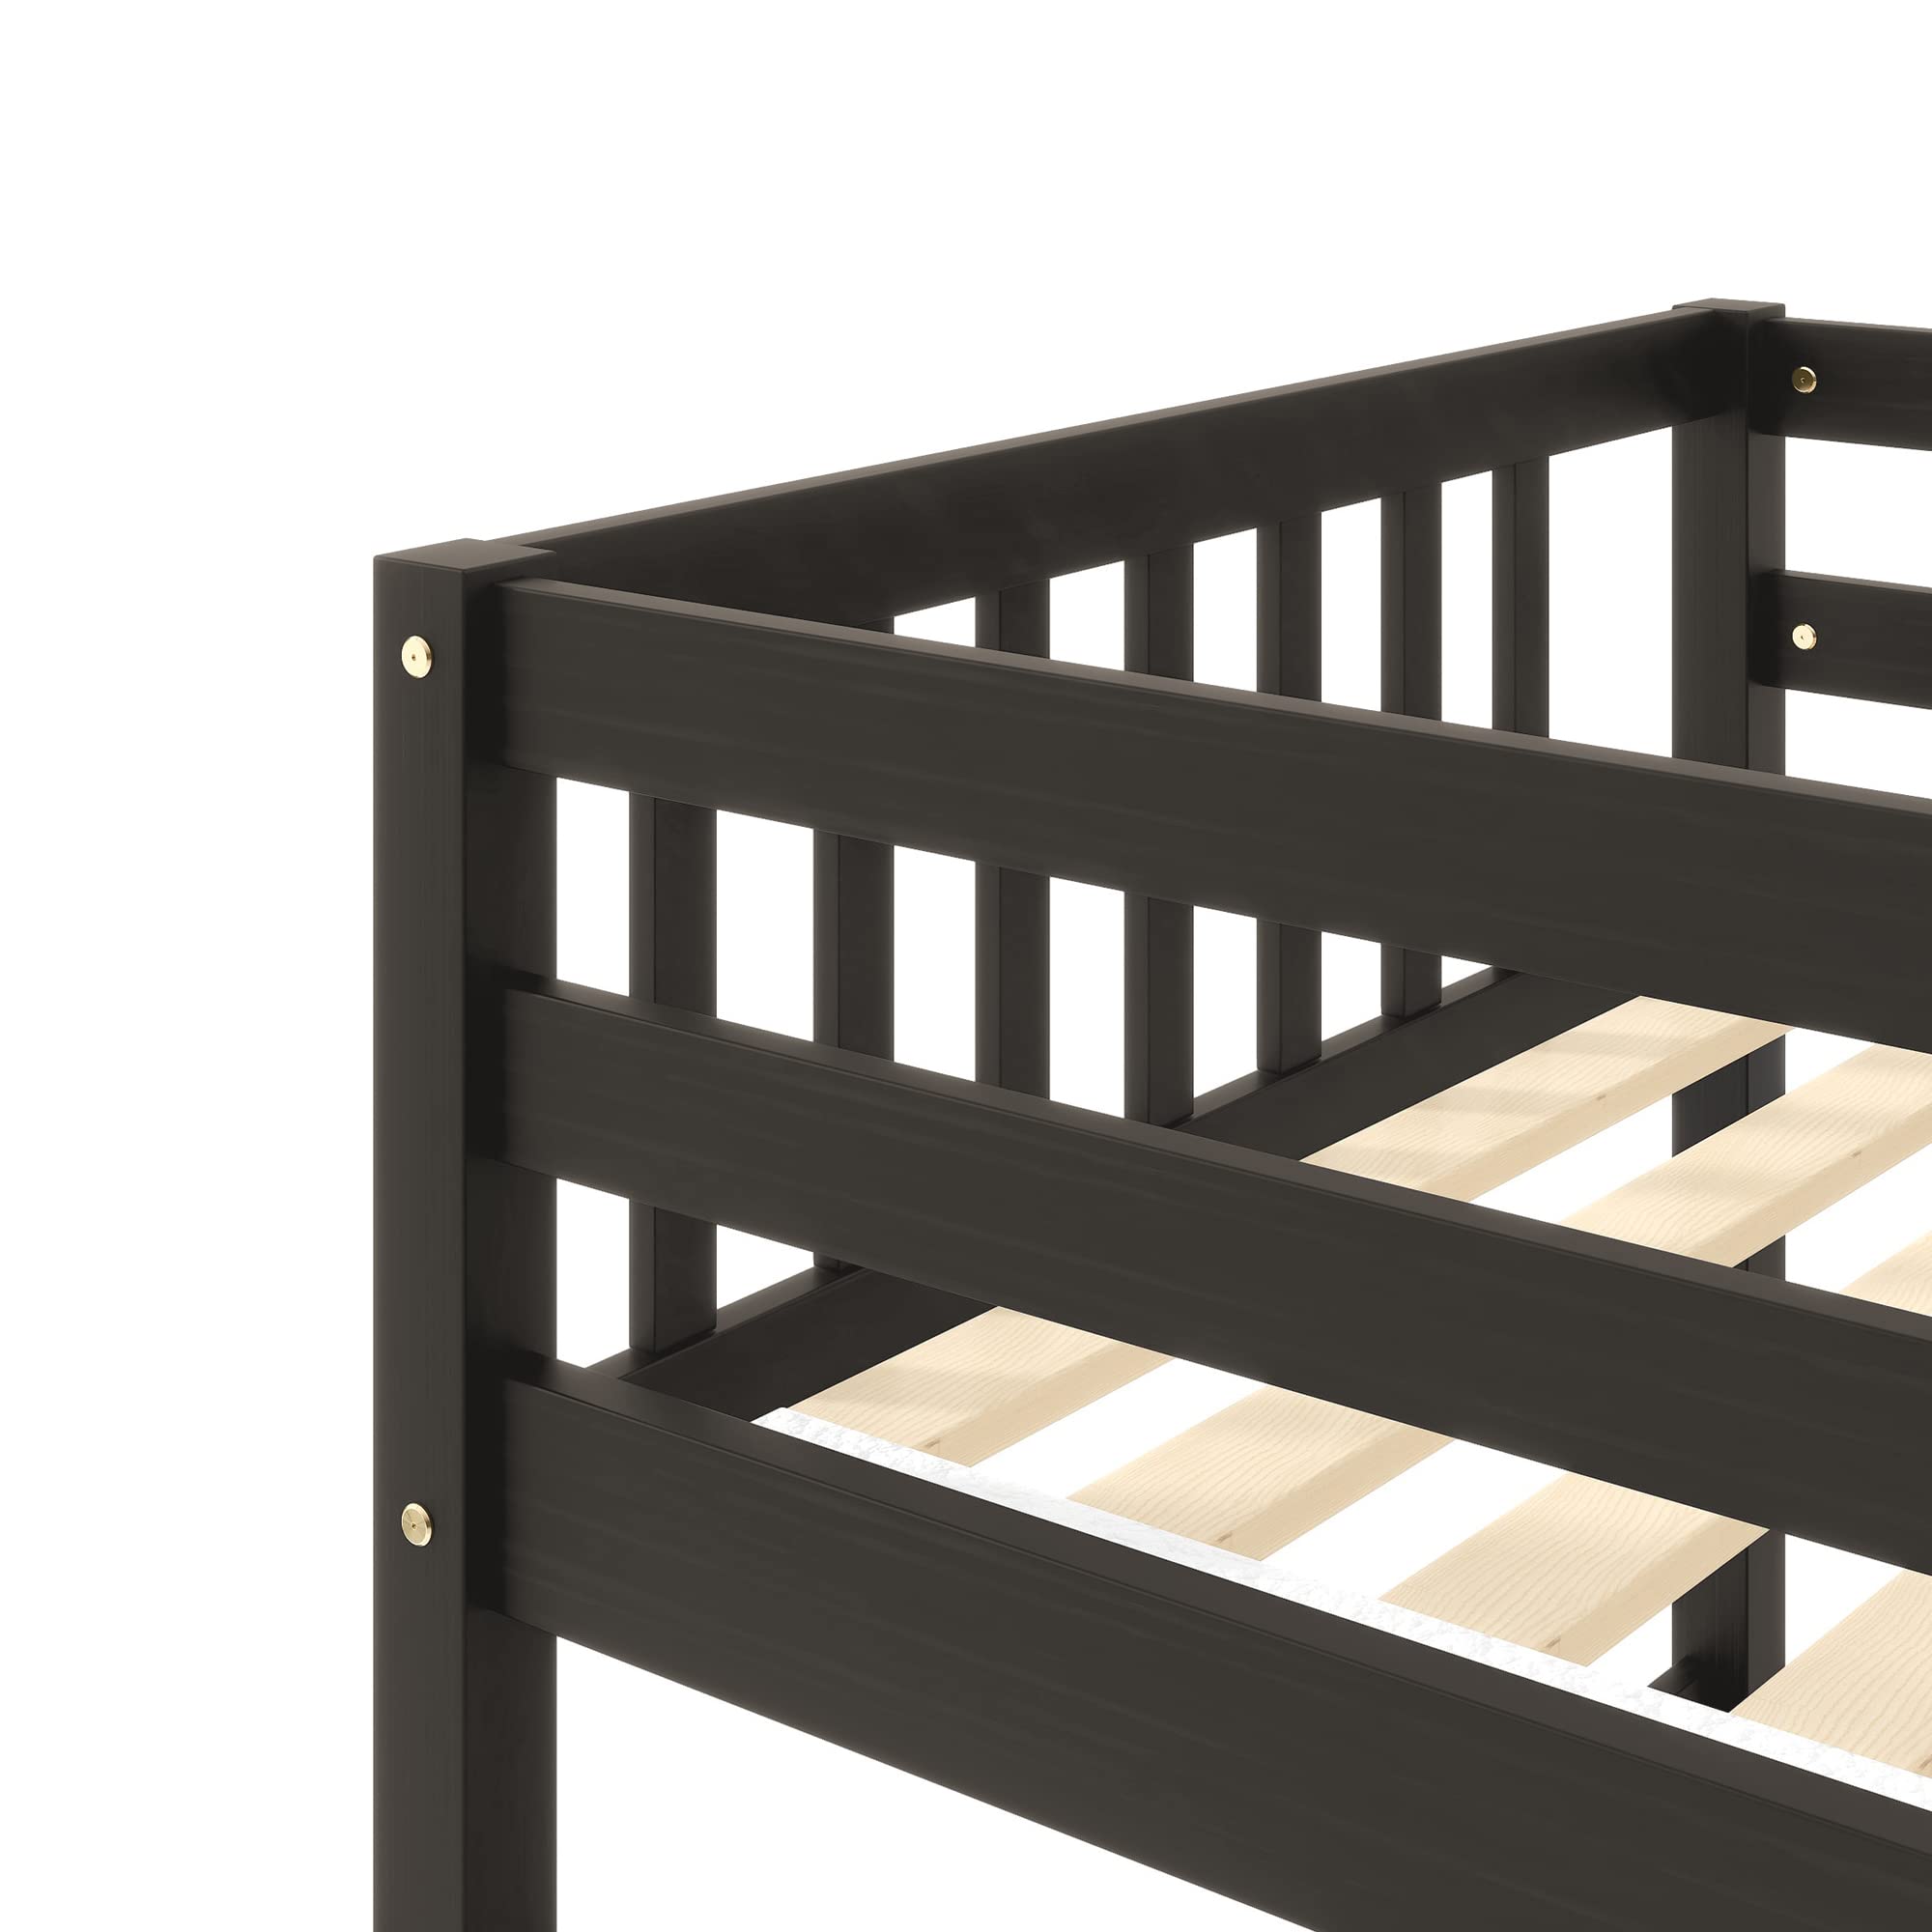 Lostcat Twin Over Twin Bunk Bed with Trundle, Heavy Duty Bunk Beds Frame with Safety Guardrails and Ladders for Kids/Teen/Adults, No Box Spring Needed, Easy to Assemble, Black - Lostcat